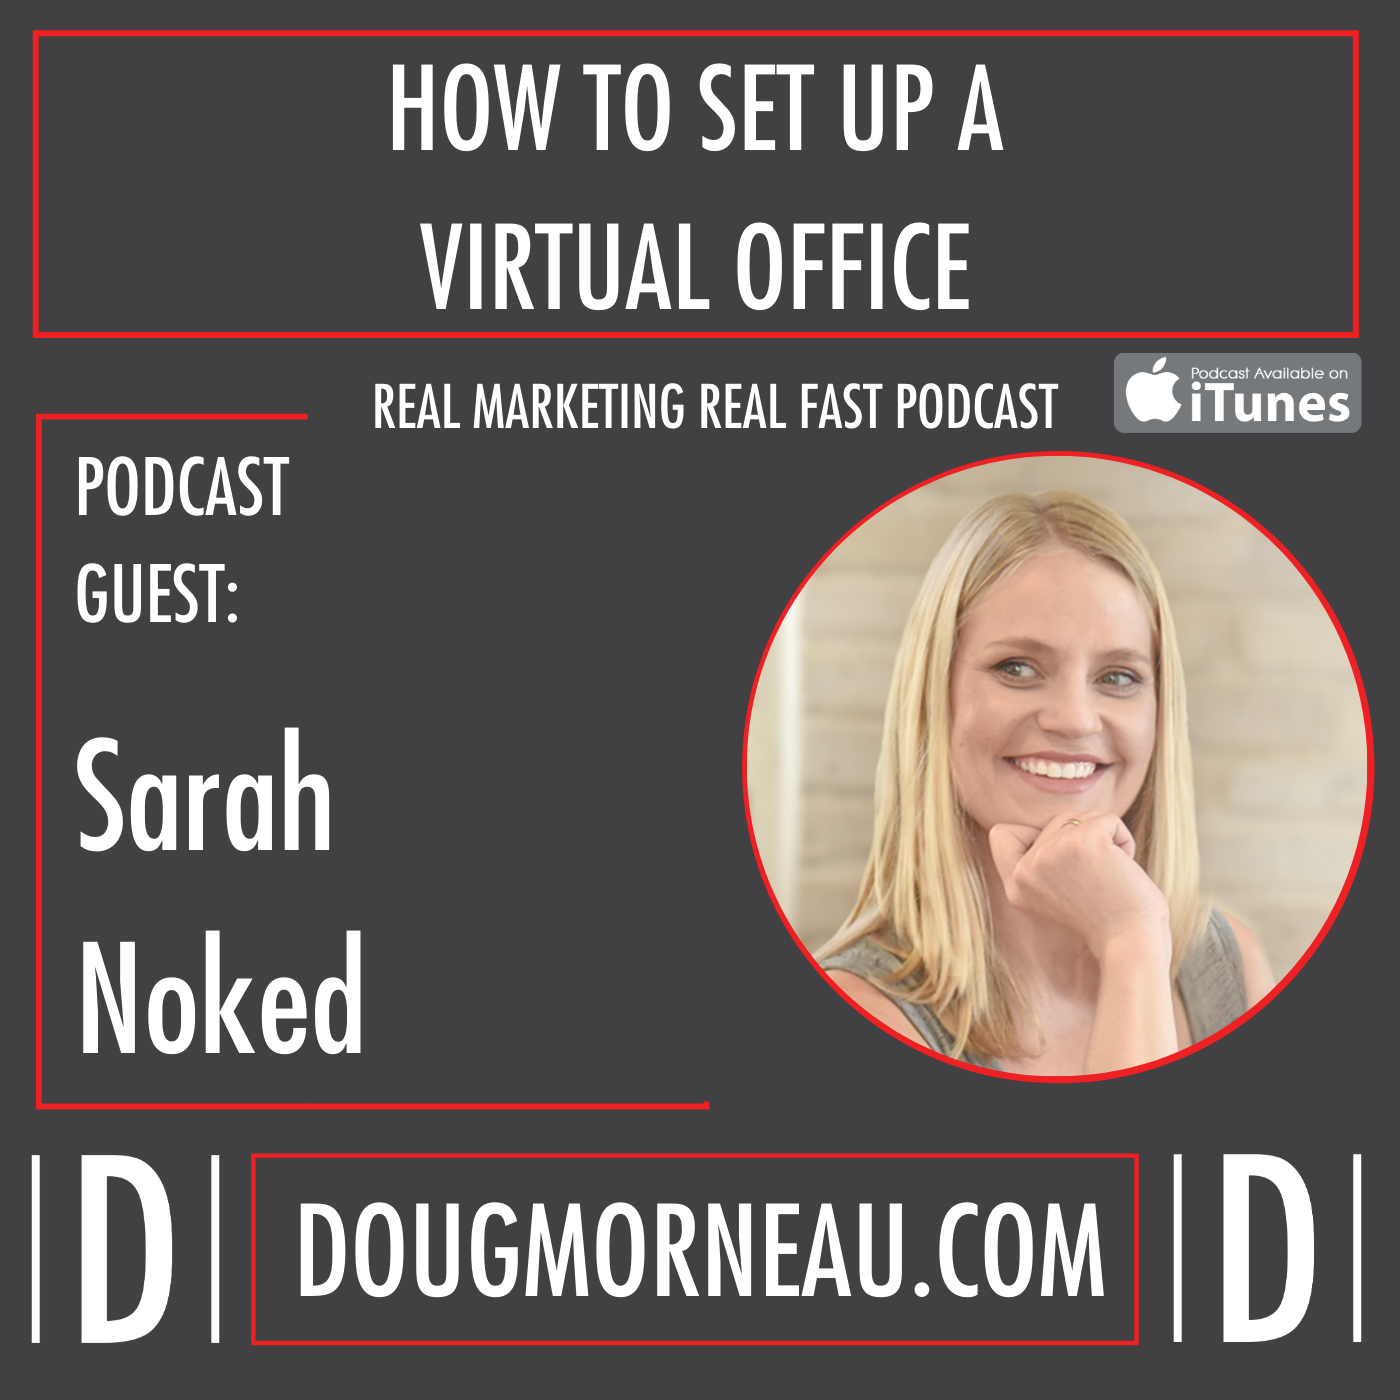 SARAH NOKED - HOW TO SET UP A VIRTUAL OFFICE - DOUG MORNEAU - REAL MARKETING REAL FAST PODCAST